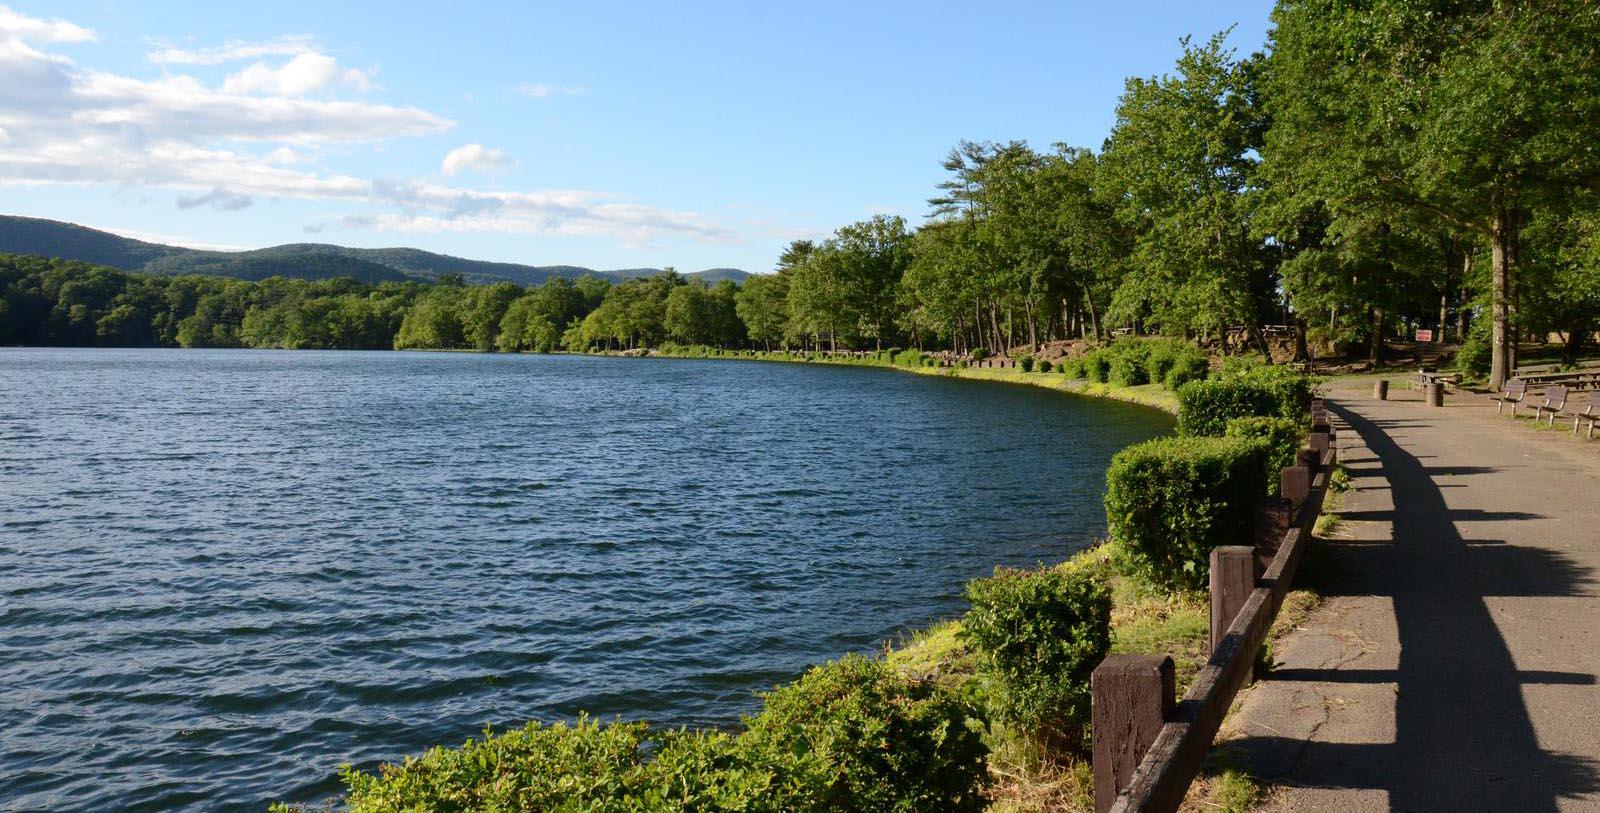 Explore the Appalachian Trail, leading to Suffern-Bear Mountain Trail and Major Welch Trailhead.